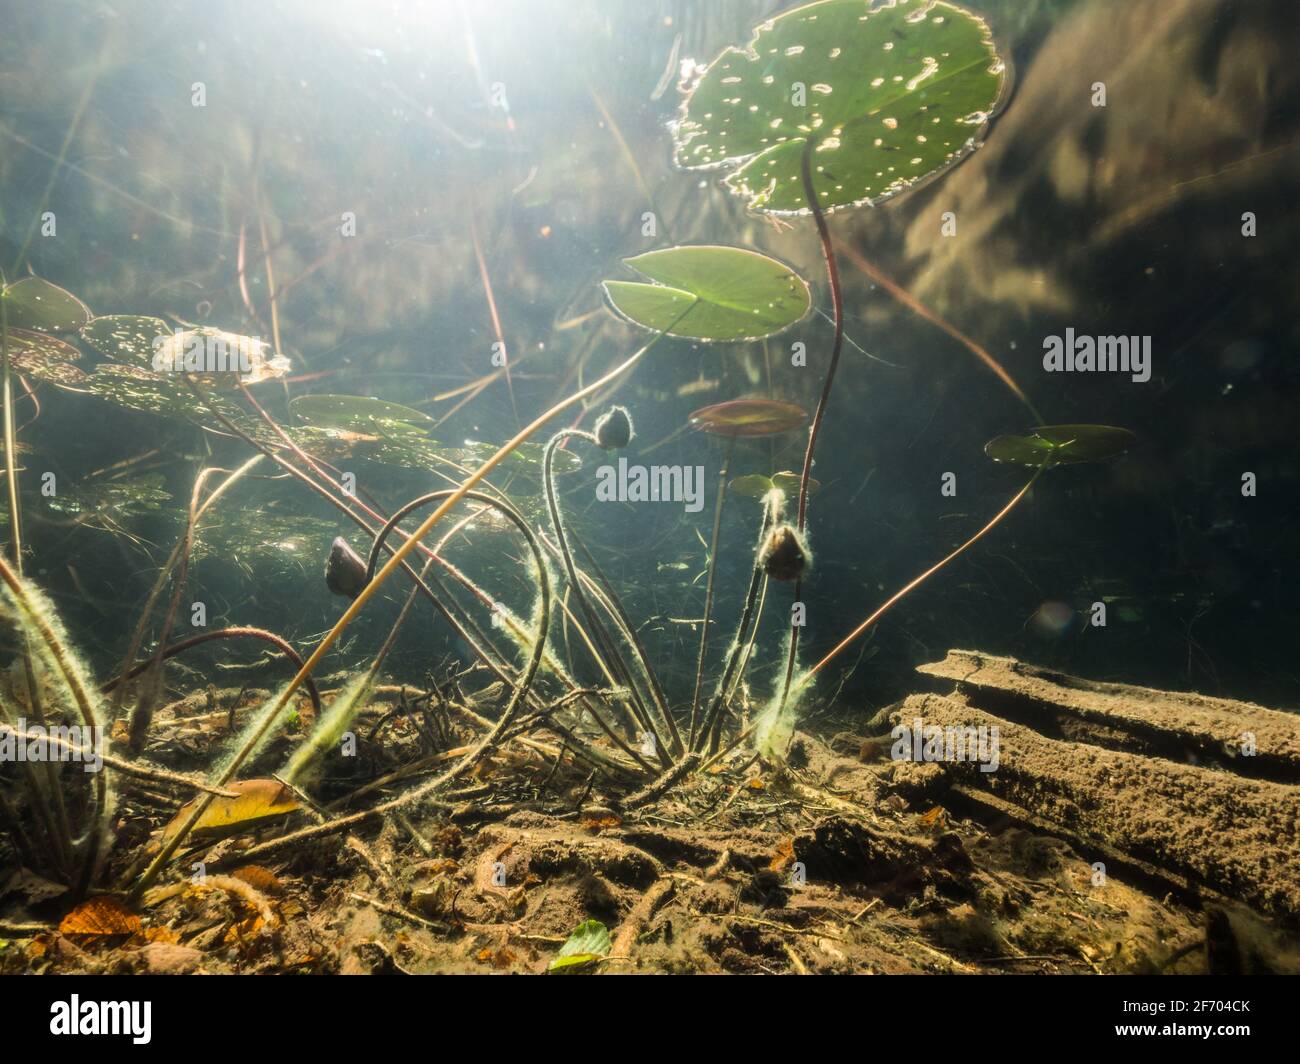 Long exposure underwater shot of white water lily and trails of moving insects Stock Photo